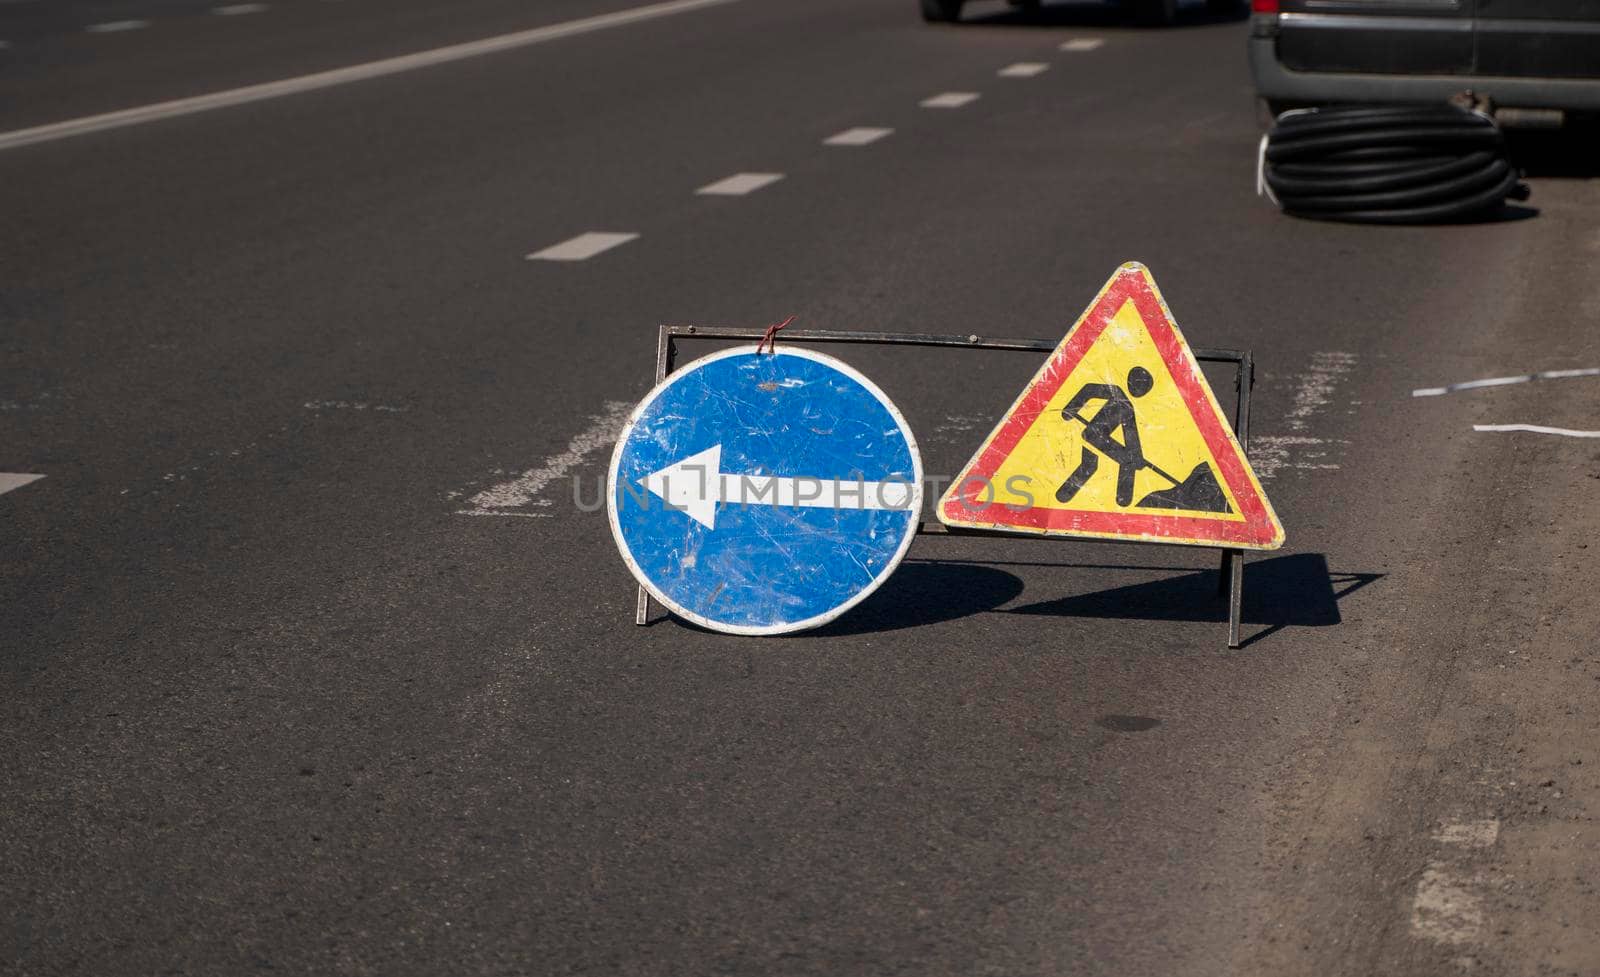 Road works sign on the road. Repair of road signs and a bypass arrow against the background of a torn road. Repair work in the middle of the carriageway, selective focus